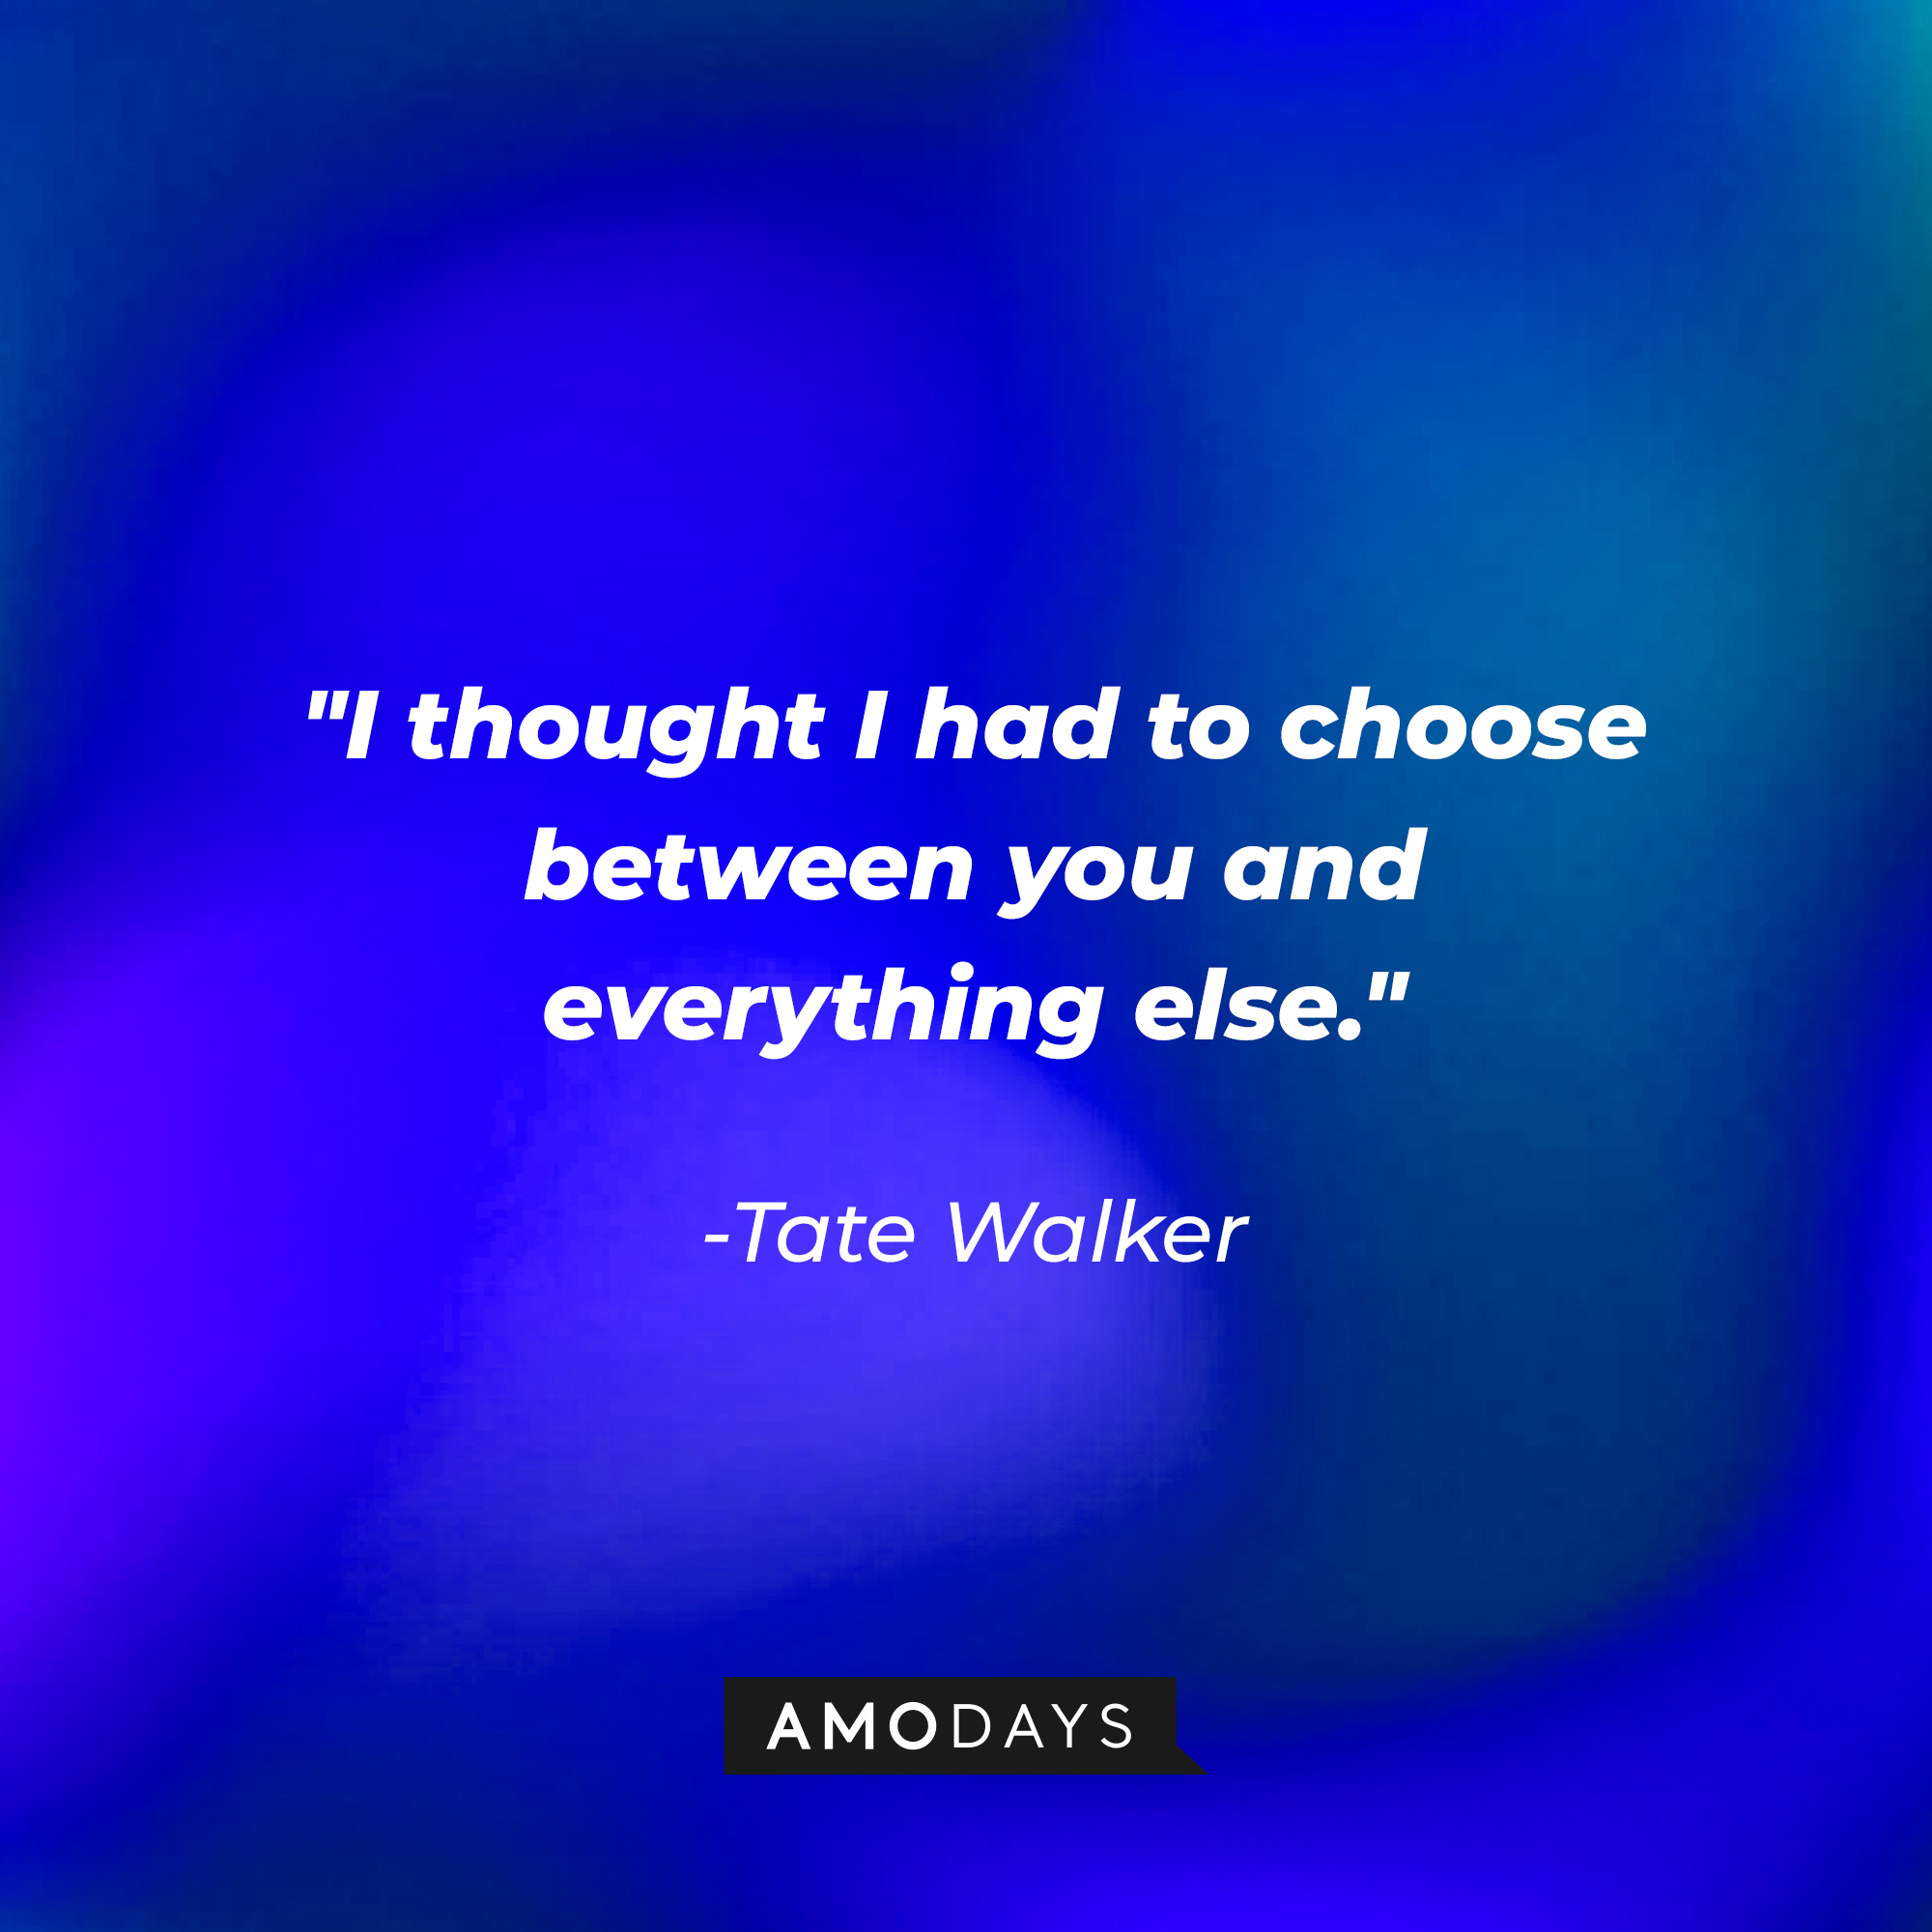 Tate Walker’s quote: "I thought I had to choose between you and everything else." │Source: AmoDays